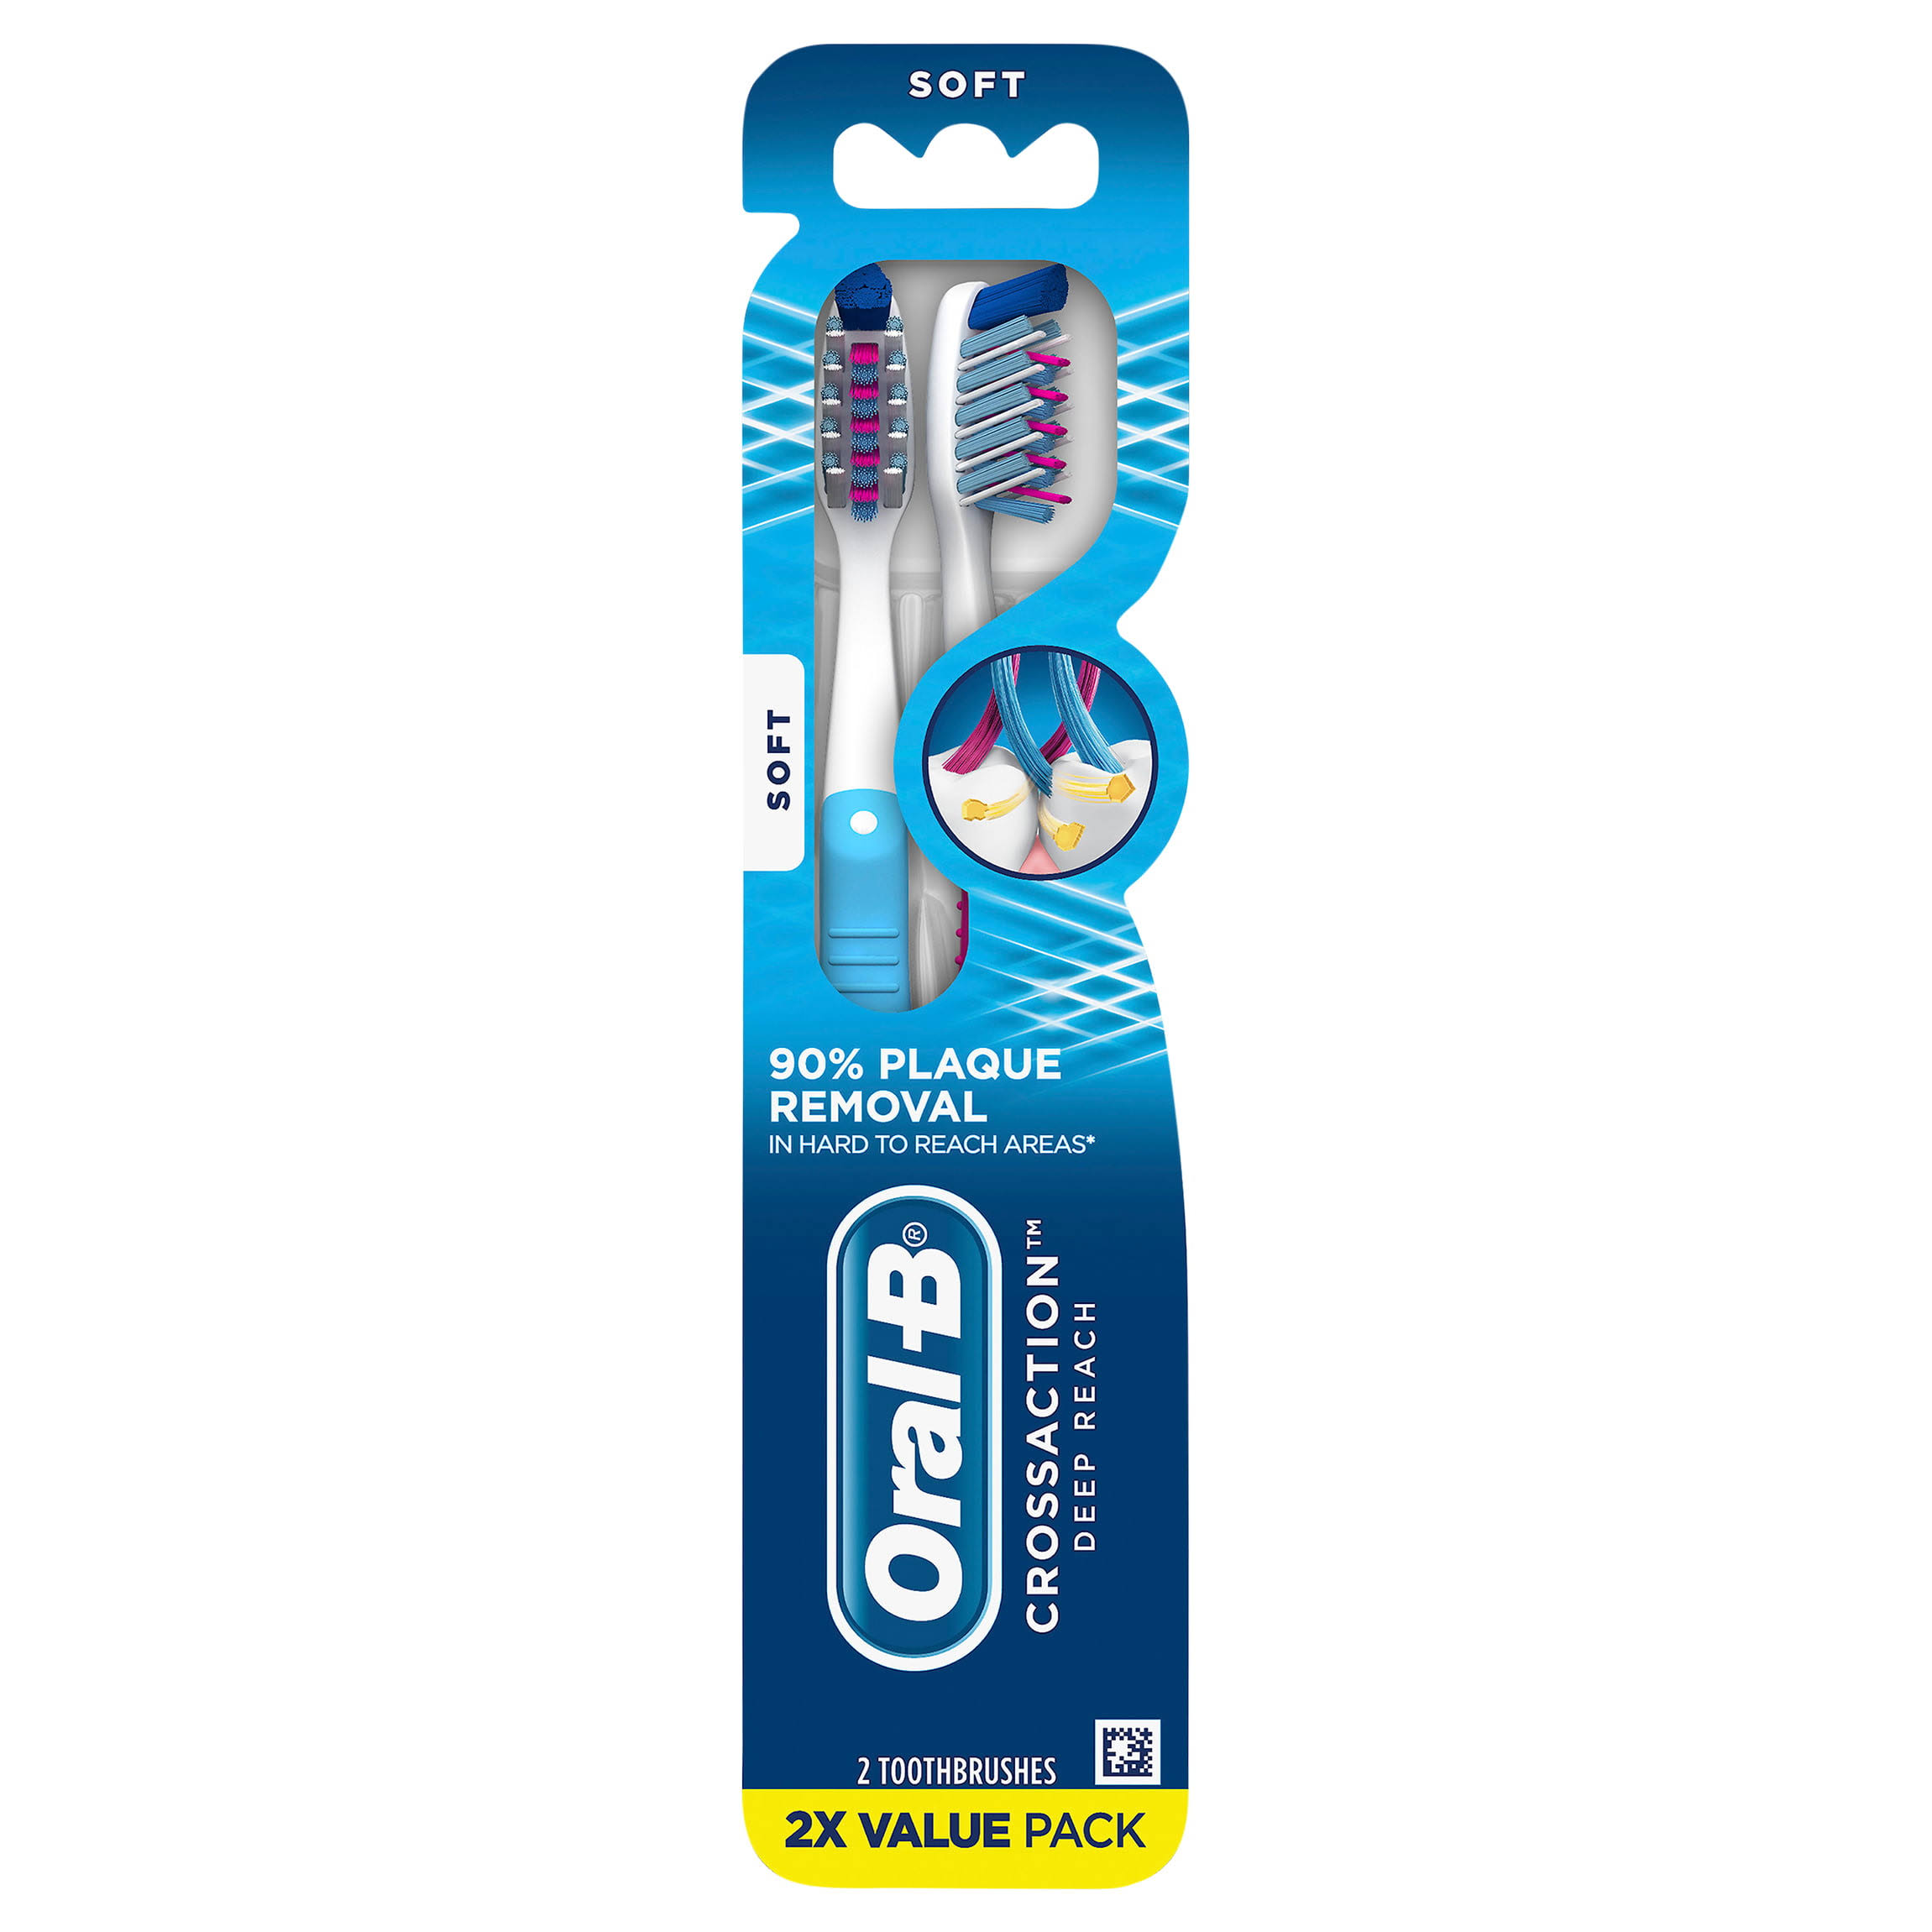 Oral B Crossaction Toothbrushes, Deep Reach, Soft - 2 toothbrushes